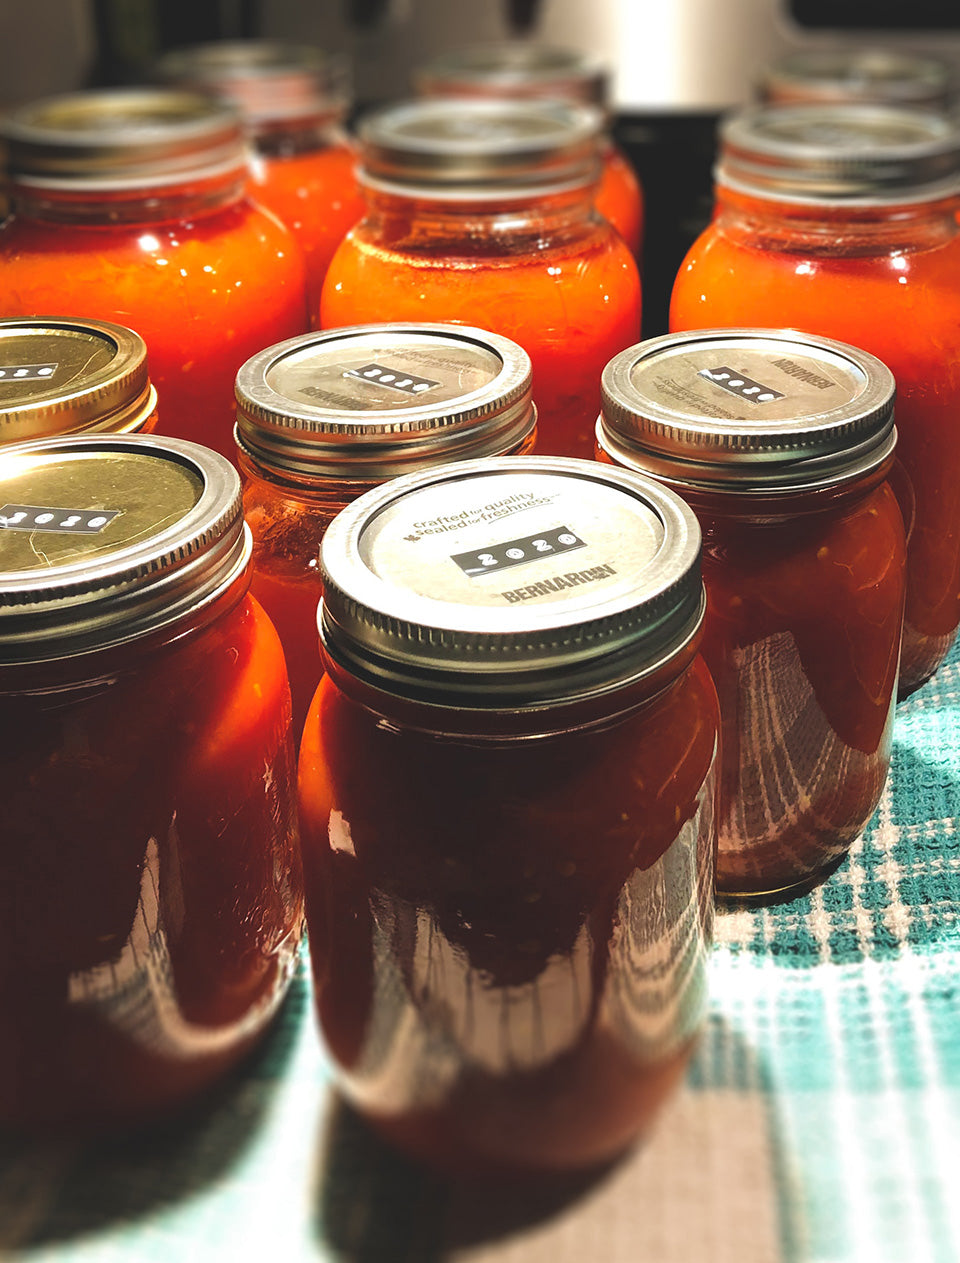 Several cans of tomato sauce sealed and preserved.